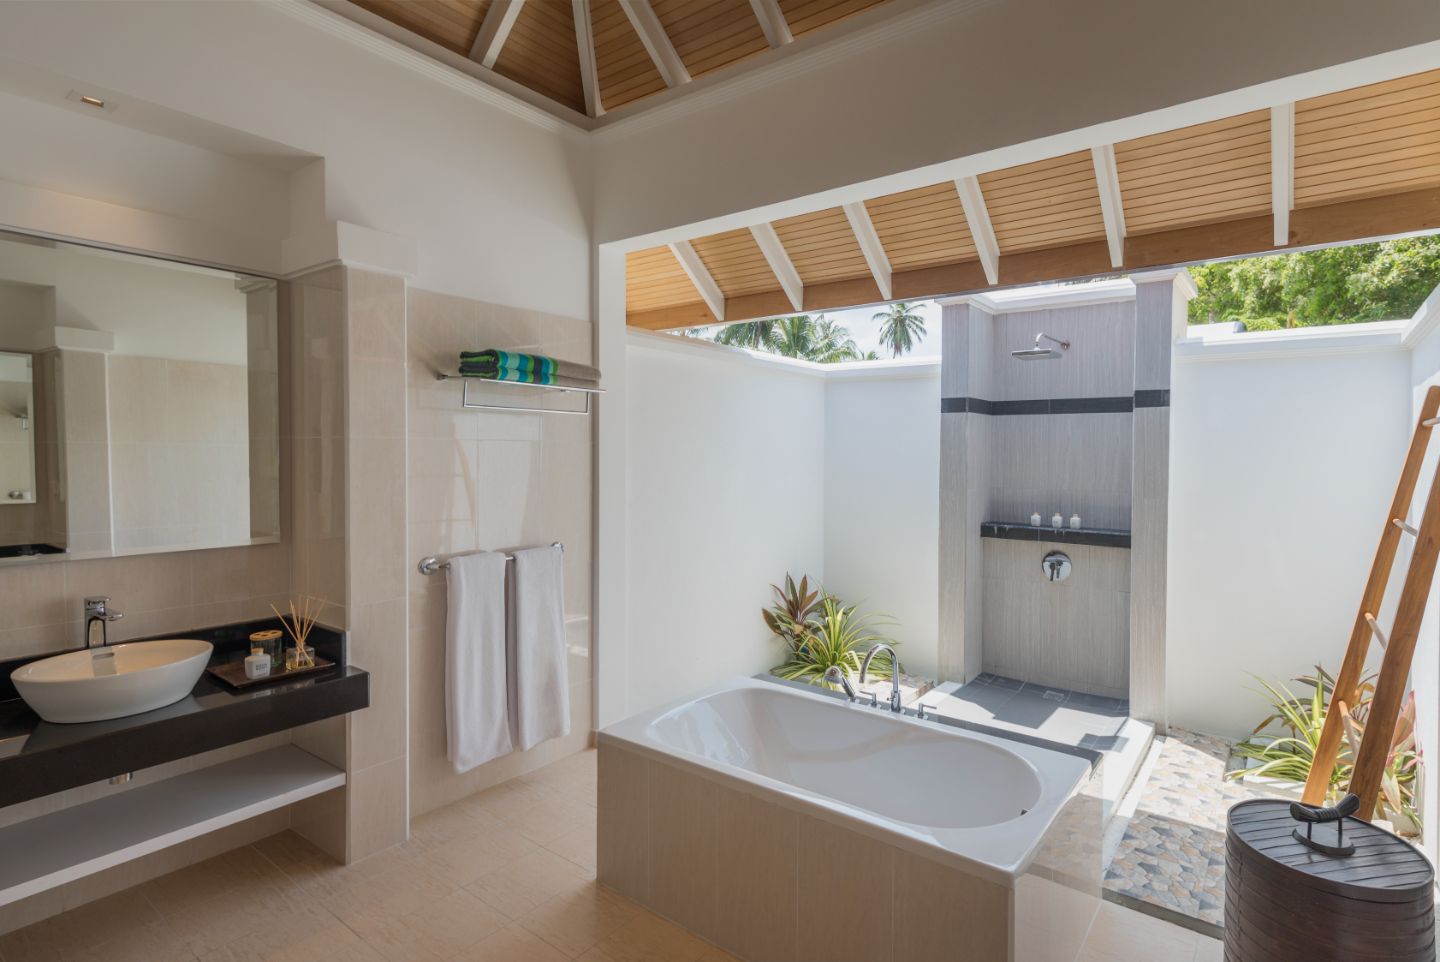 The bathroom of the Deluxe Bungalow at Kurumba Maldives